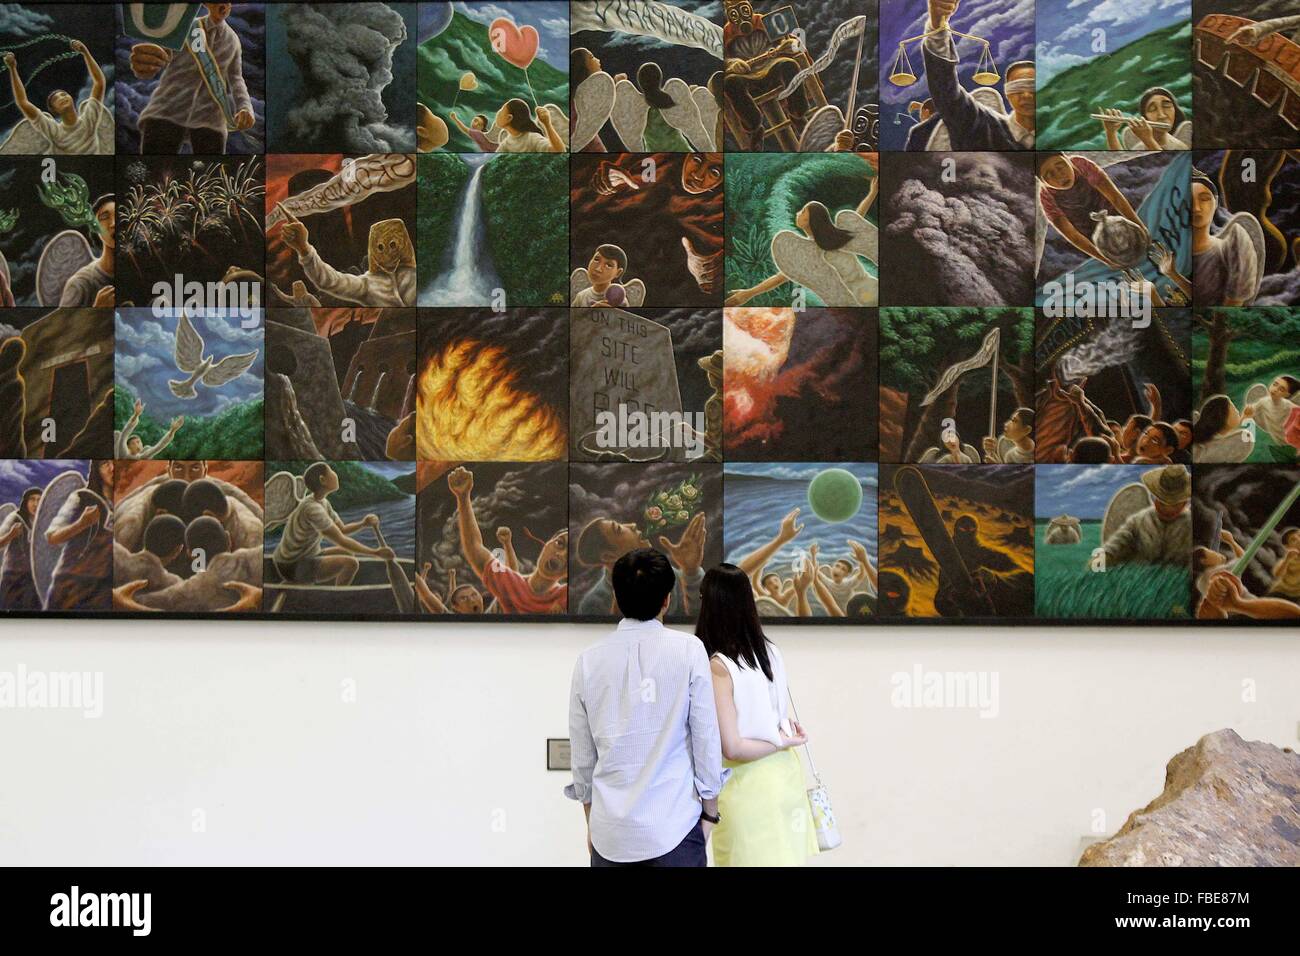 Rizal Province, Philippines. 15th Jan, 2016. Visitors look at artworks inside the Pinto Art Museum in Rizal Province, the Philippines, Jan. 15, 2016. The Pinto Art Museum exhibits more than 300 modern paintings, sculptures, and art installations by various local artists. © Rouelle Umali/Xinhua/Alamy Live News Stock Photo